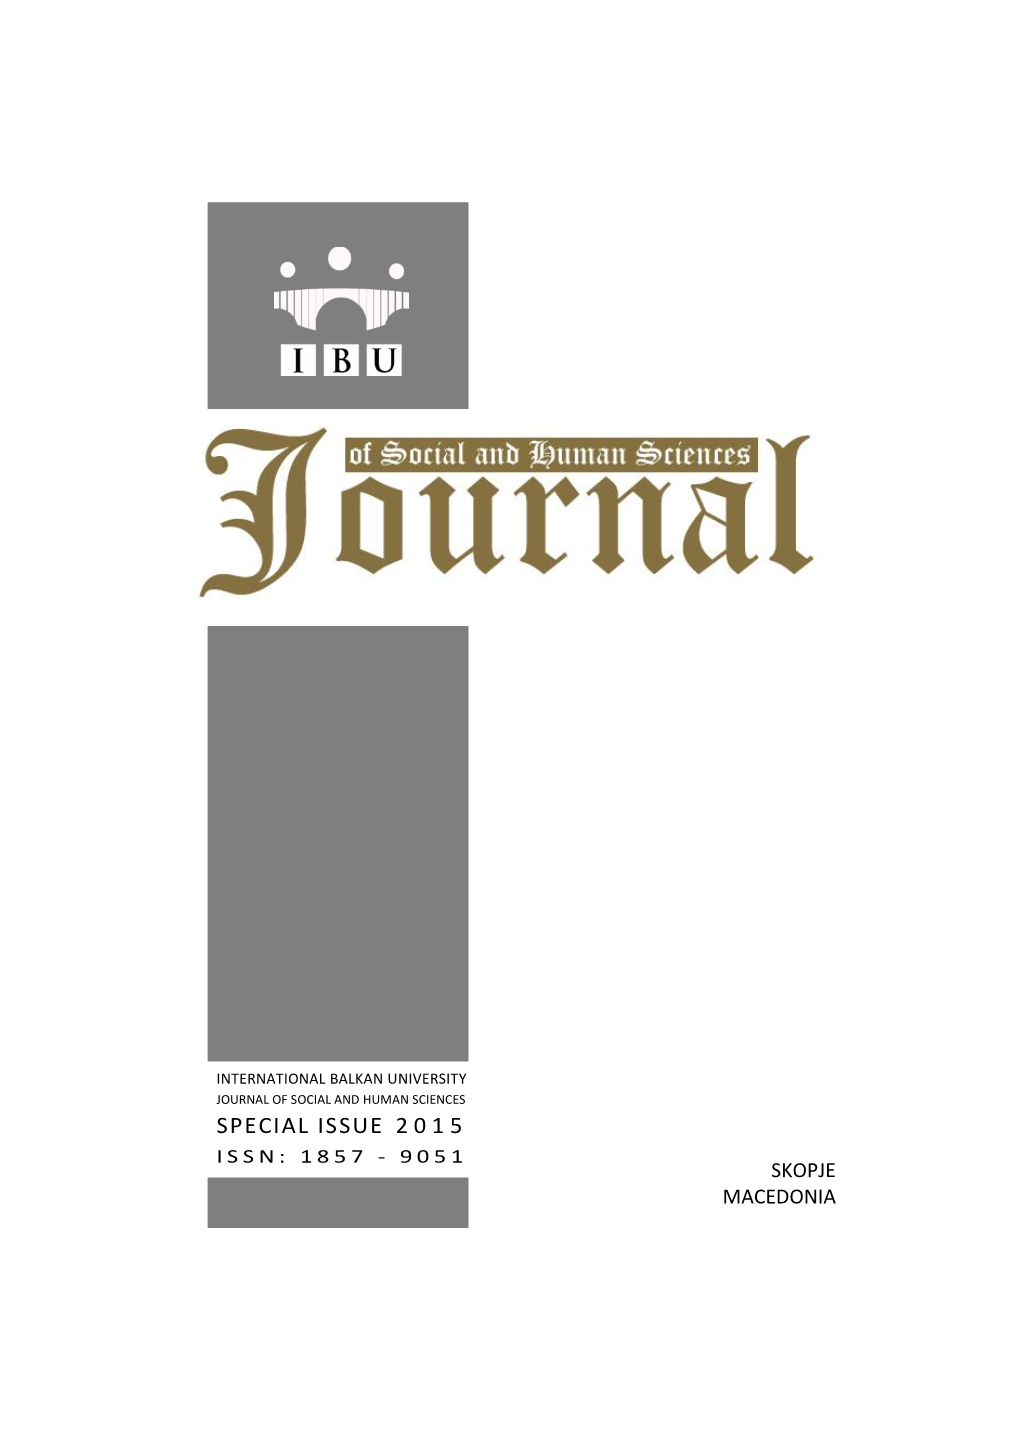 SPECIAL ISSUE 2 0 1 5 ISSN: 1 8 5 7 - 9 0 5 1 SKOPJE MACEDONIA Journal of Social and Human Sciences Special Issue Skopje 2016 ISSN: 1857-9051